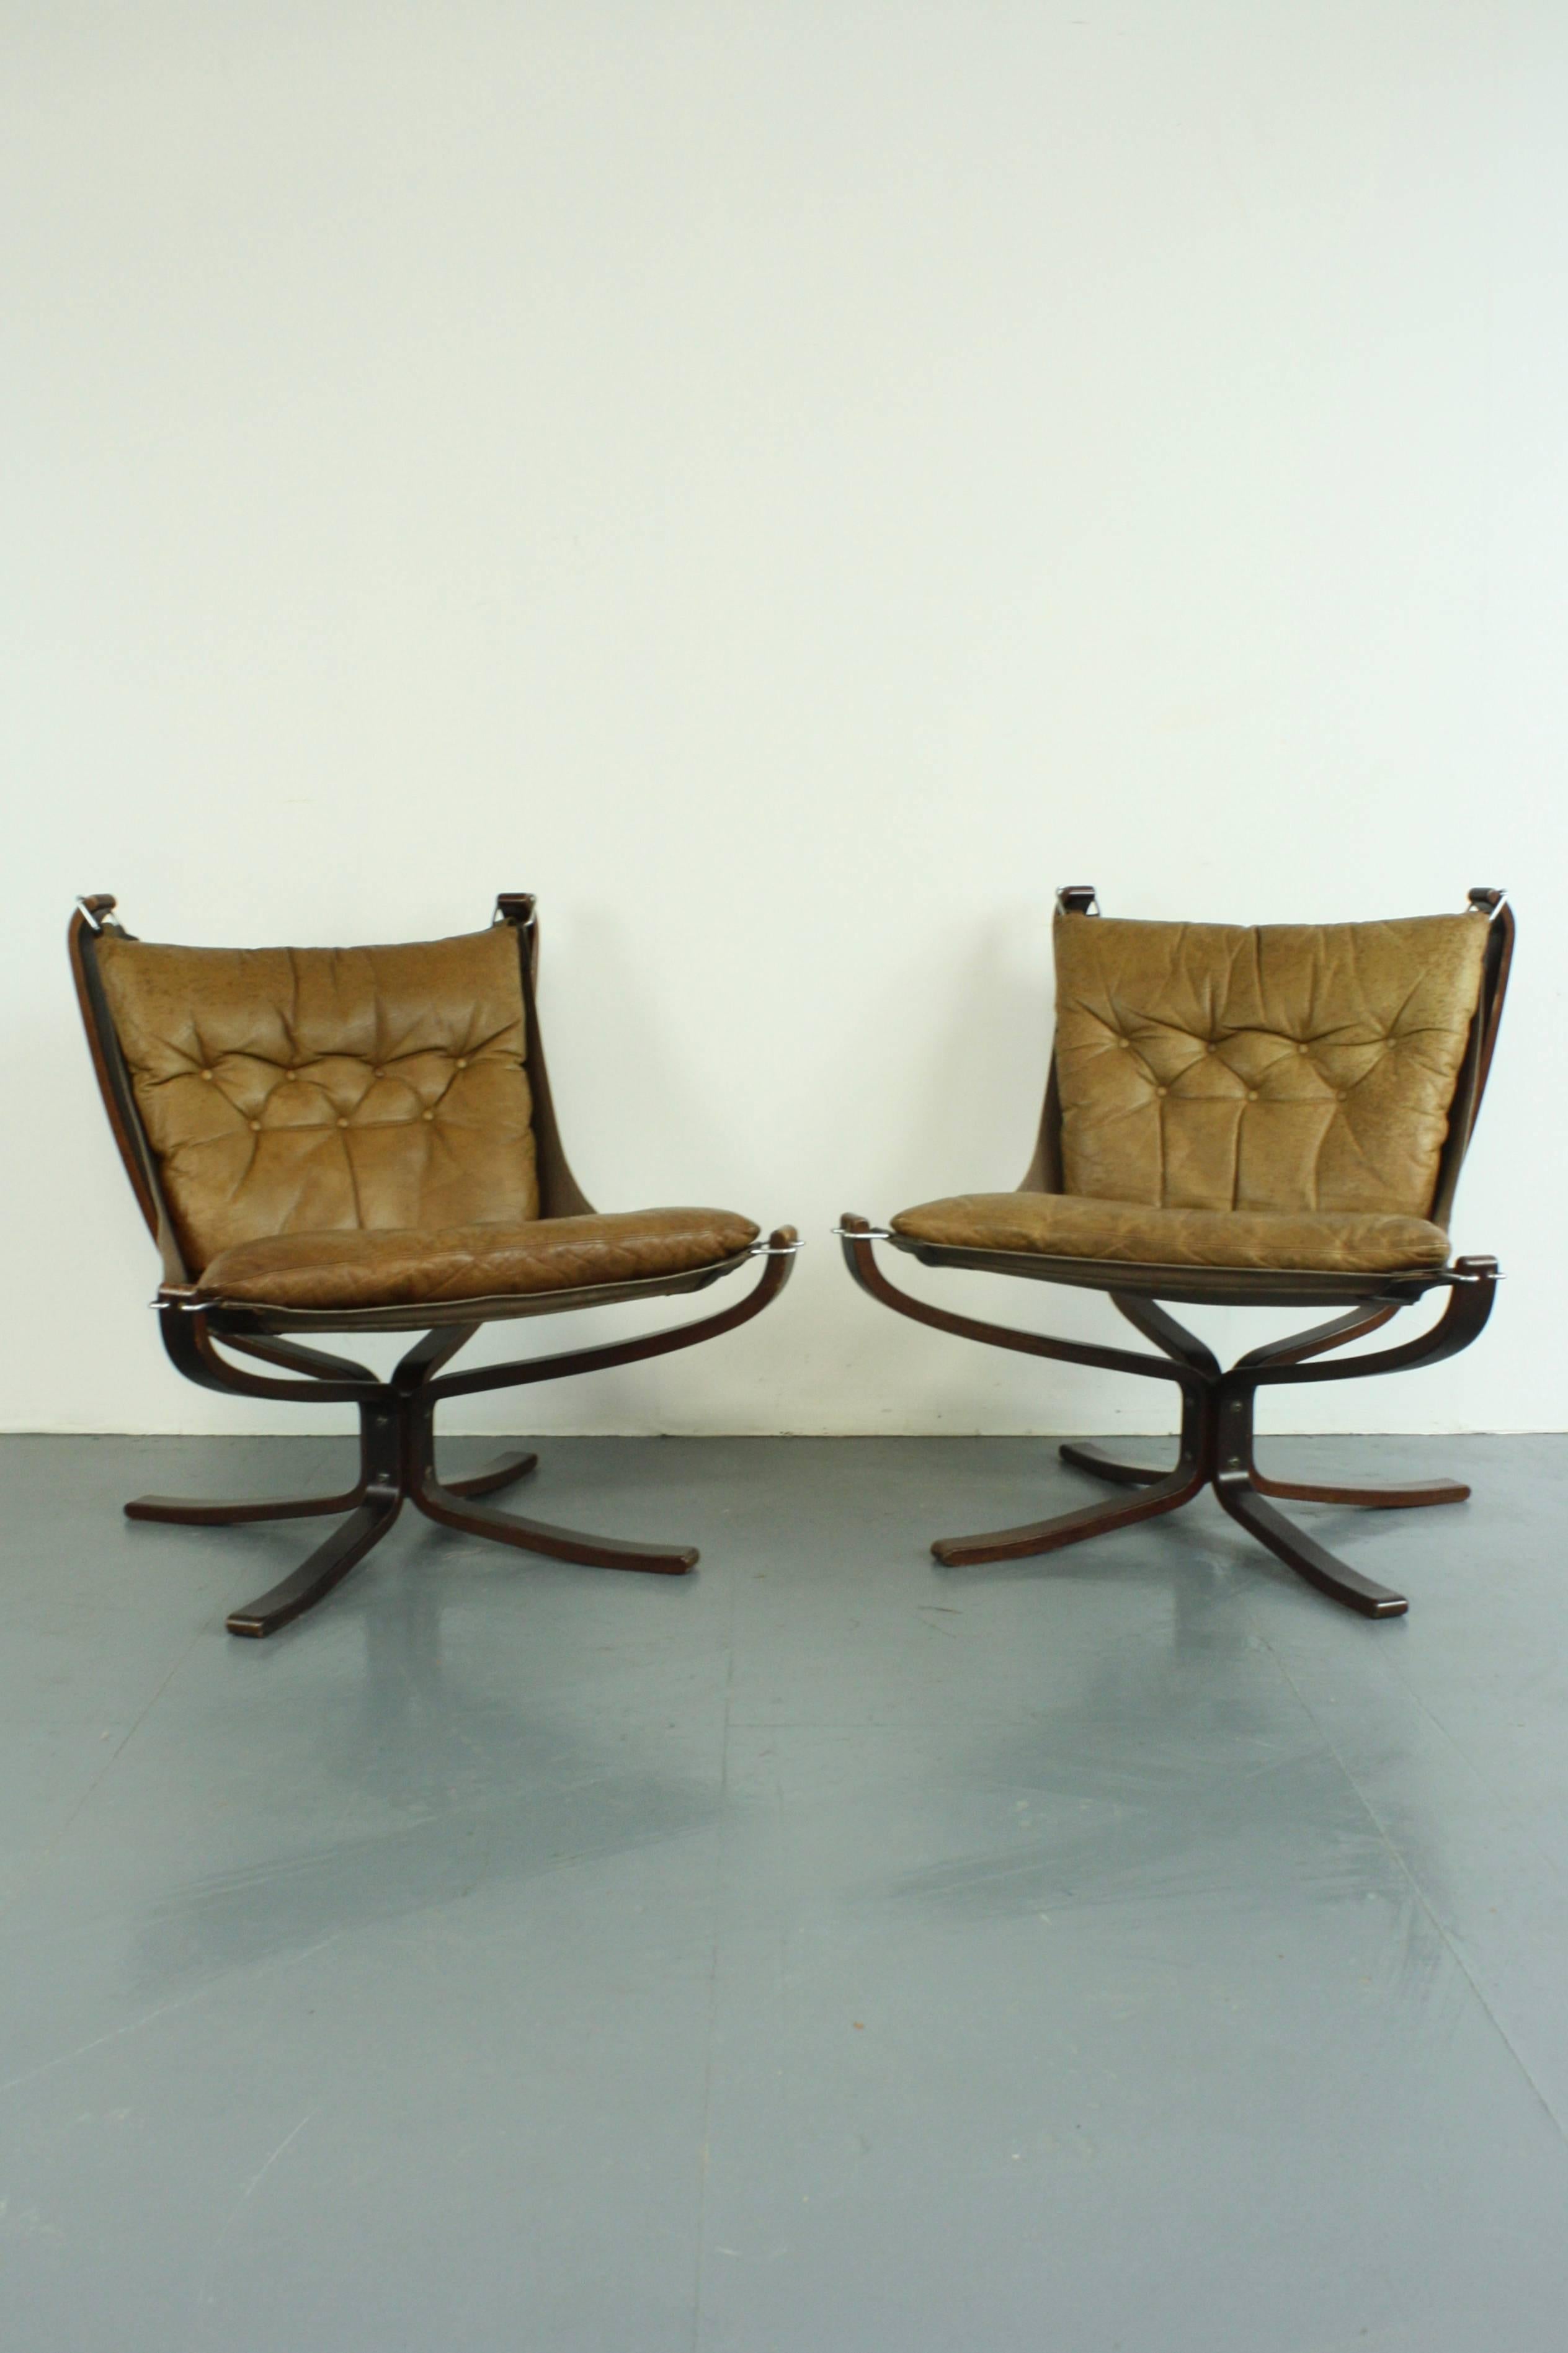 Lovely pair of low back camel leather Falcon chairs designed by the Norwegian designer, Sigurd Resell, in the 1970s. With rosewood base which is an X-shape.

In good vintage condition. The leather is in good condition for its age with no rips or